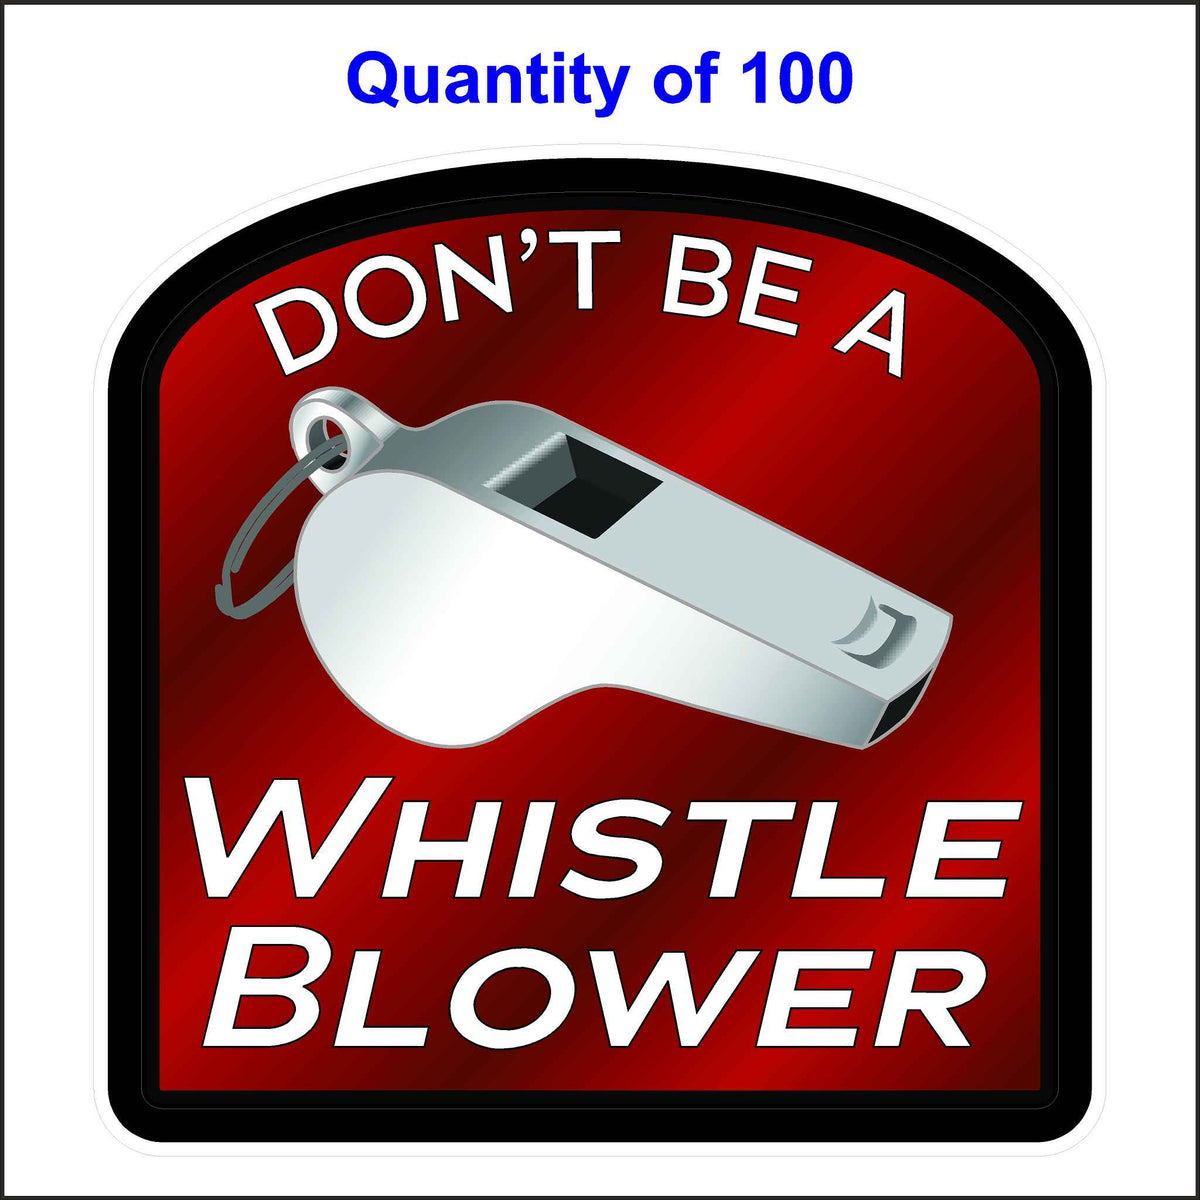 Don’t Be a Whistleblower Sticker. Red and Black With White Letters and a Silver Whistle. 100 Quantity.